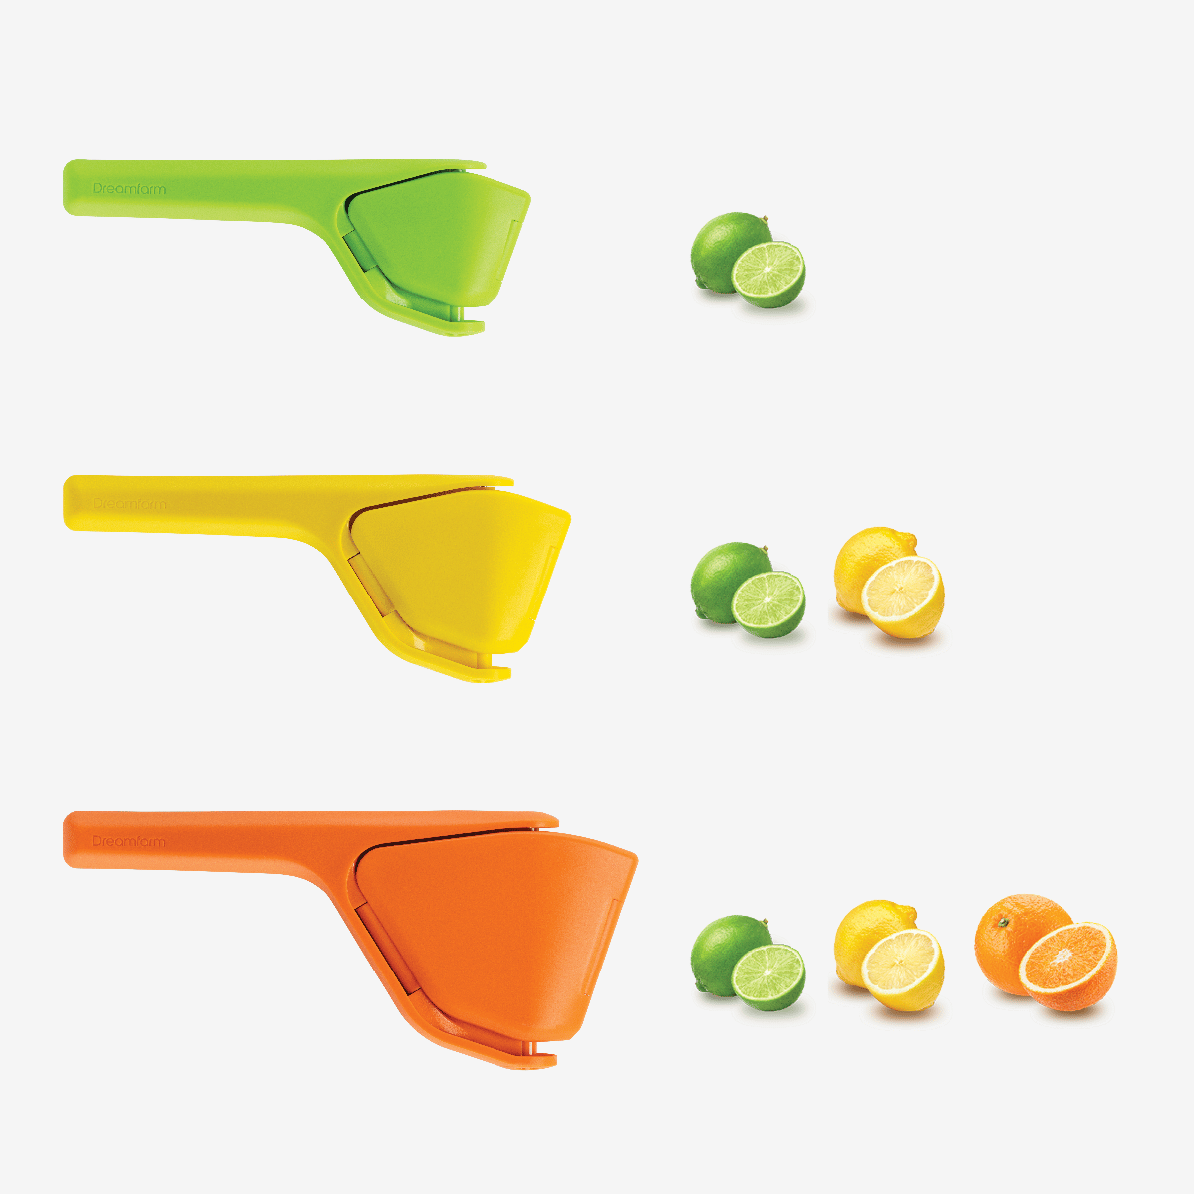 Fluicer in green is the ultimate citrus juicer that folds and stores easily. Its hinged design reduces effort and includes a pip catcher for precise juice flow. Smallest Fluicer in the family made for limes.